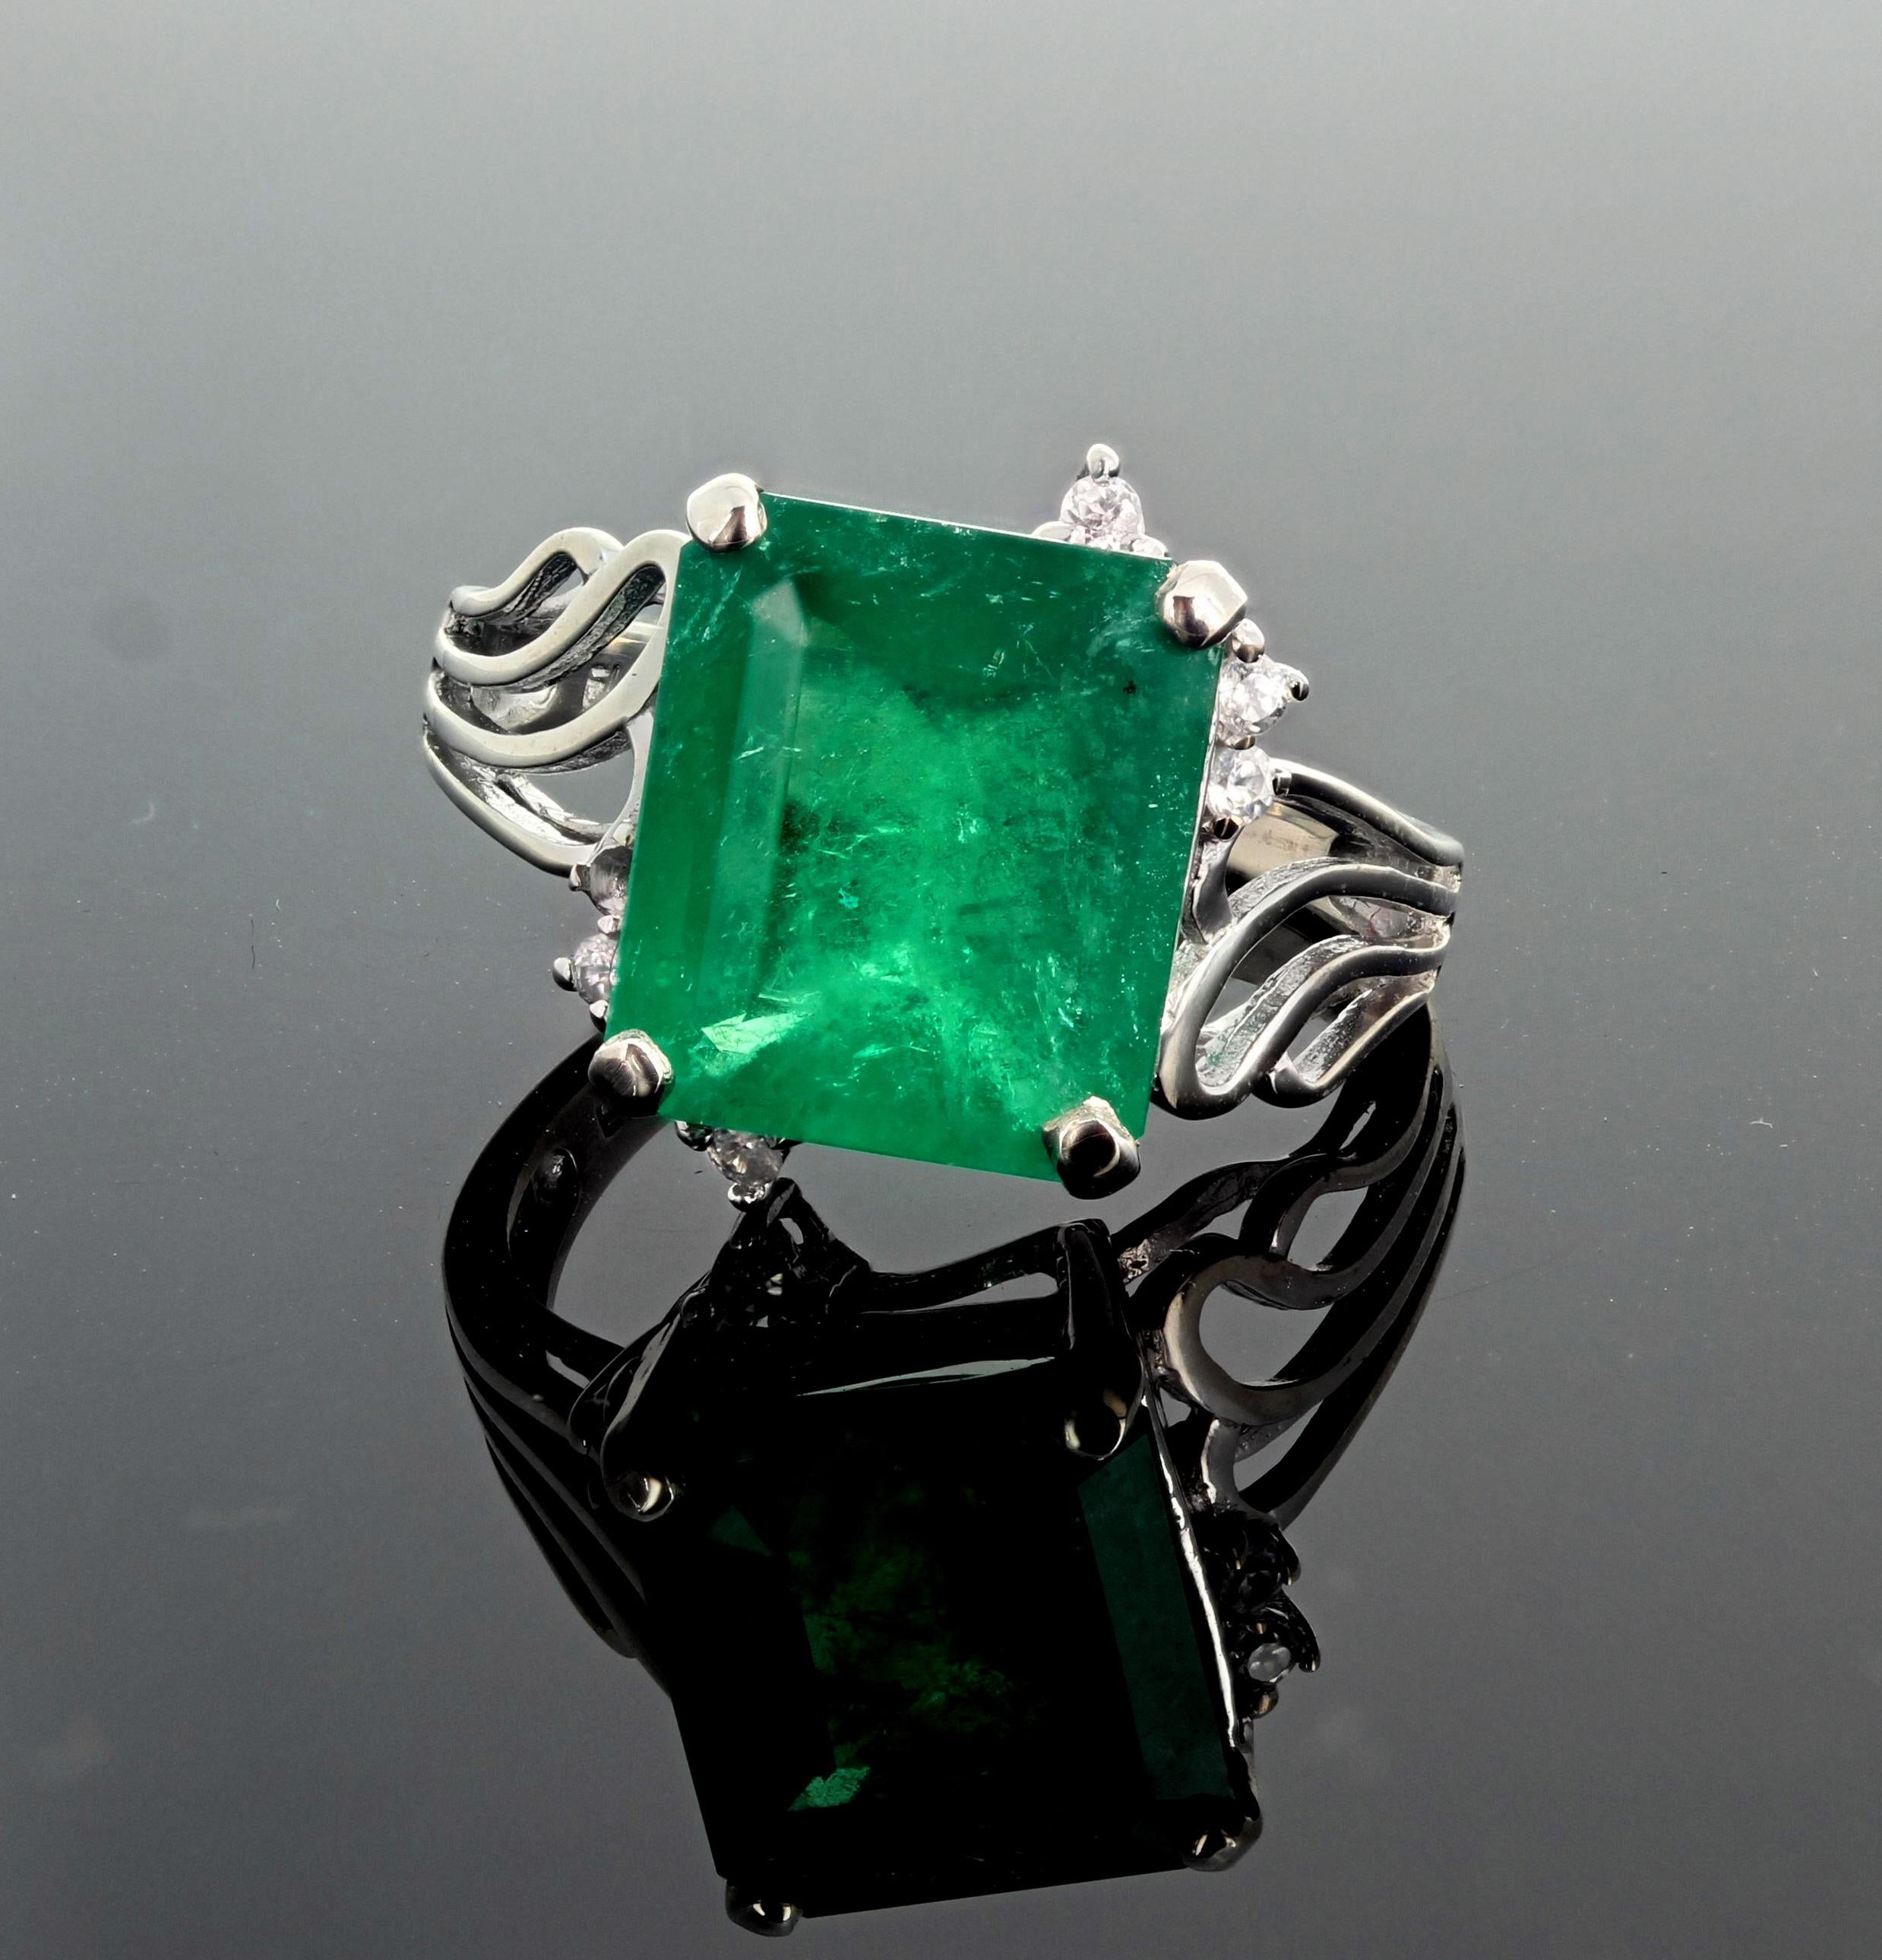 Unique 4.93 Carat green Emerald (12 mm x 10 mm) accented with sparkling white diamonds set in a handmade white gold ring size 7 (sizable).  This is a natural Brazilian Emerald.  More from this seller by putting gemjunky into 1stdibs search bar.